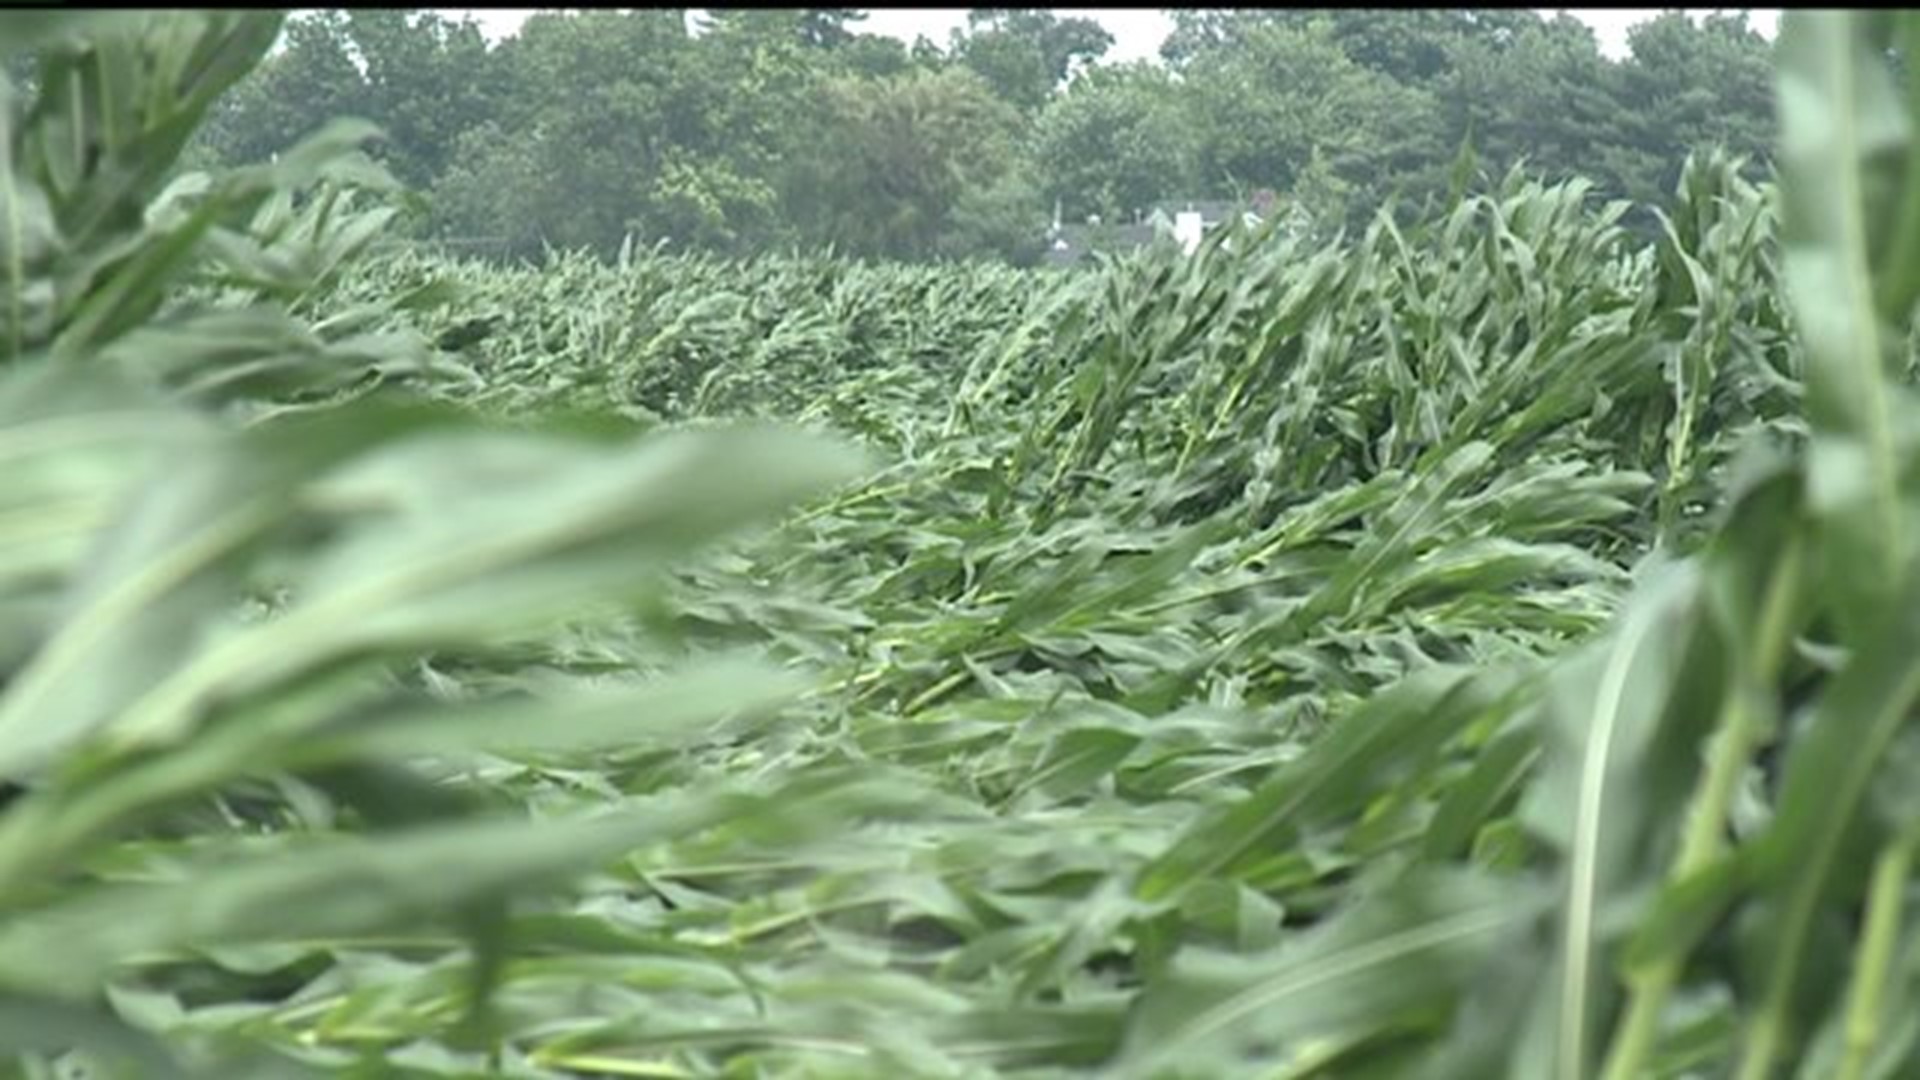 Crops flattened by storm